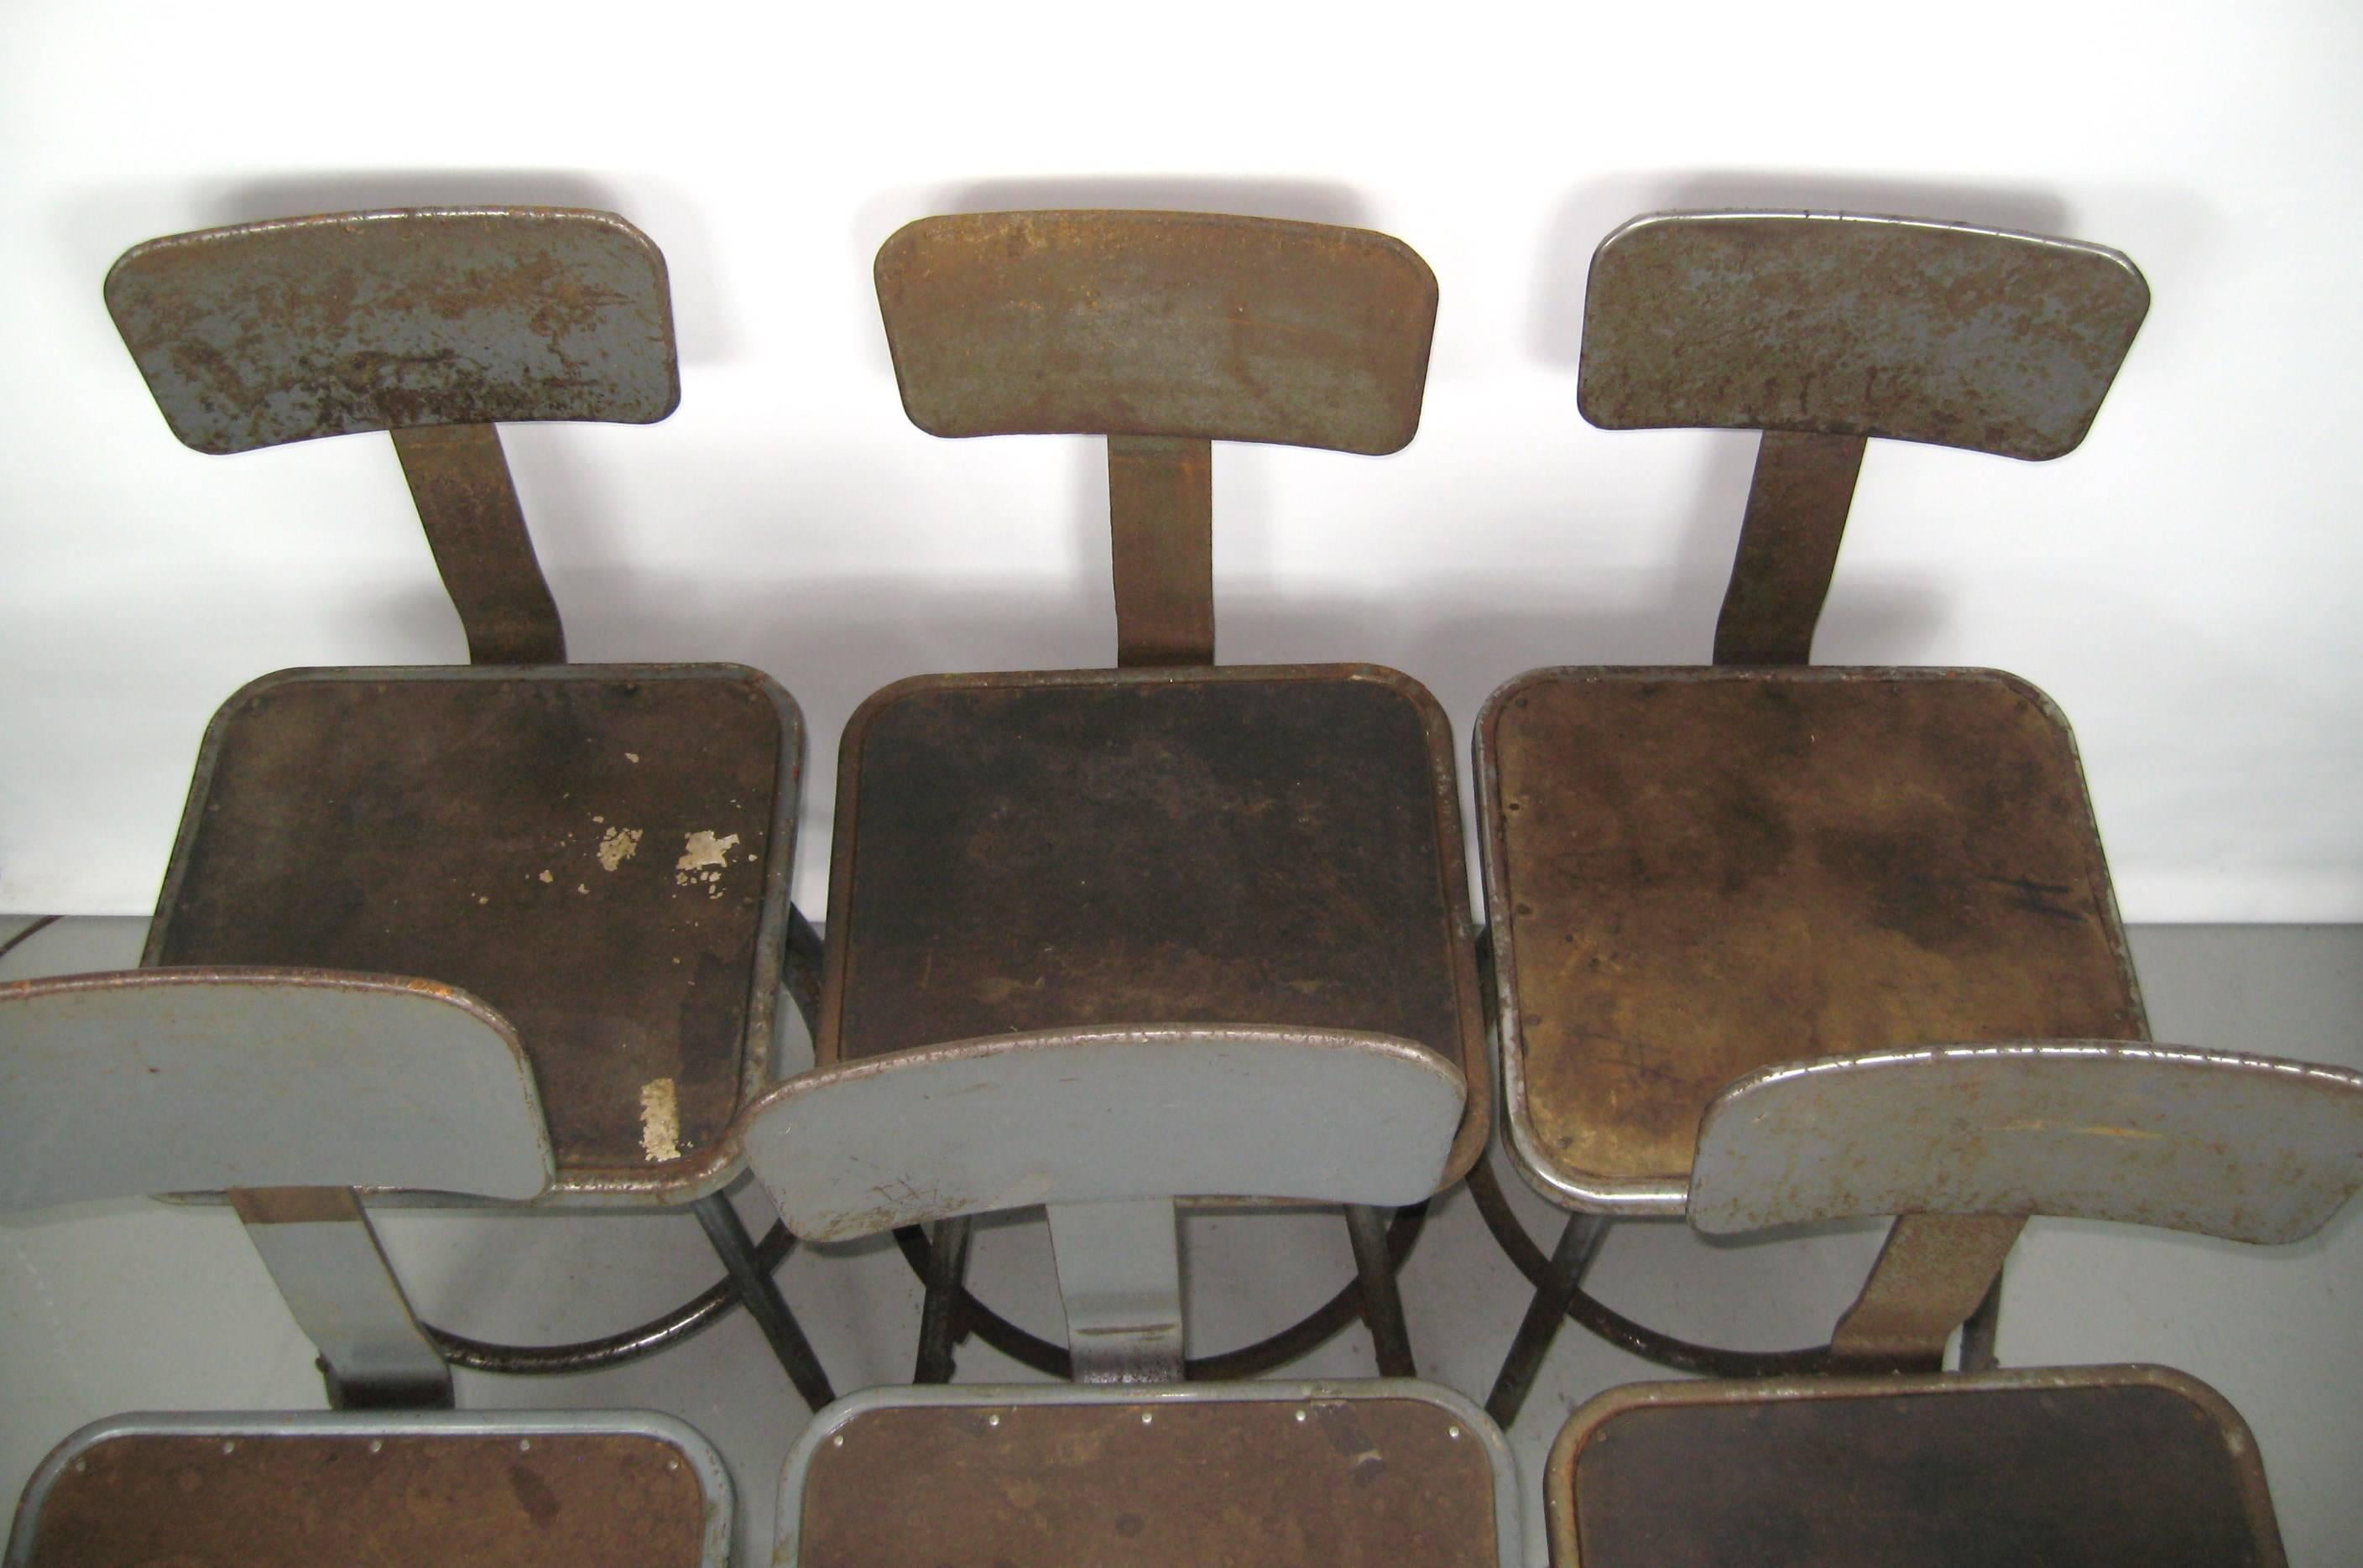 American Industrial Metal Machine Age Shop Stools from Schrade Knife Factory in NY For Sale